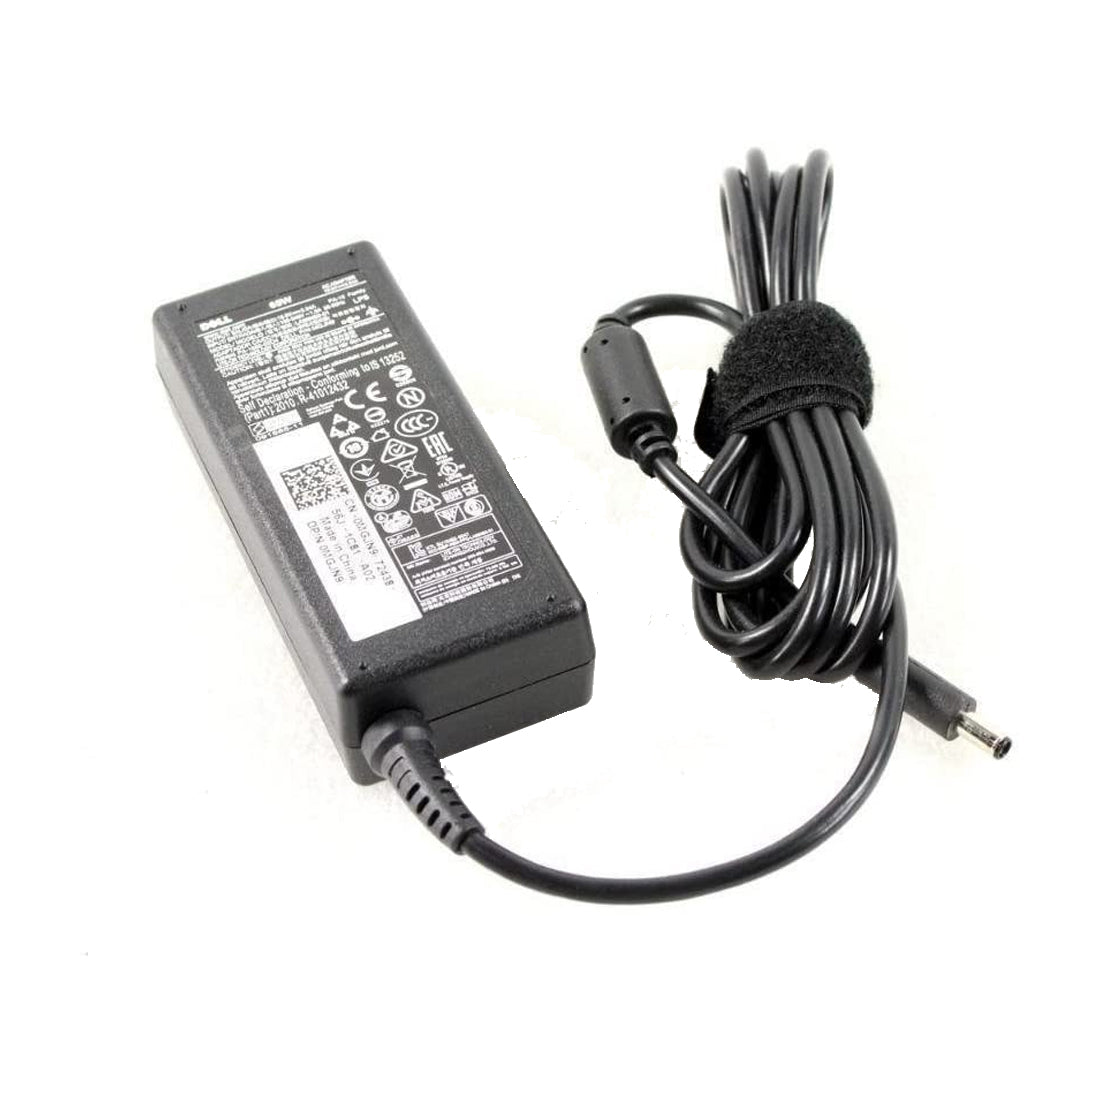 Dell Original 65W 19.5V 4.5mm Pin Laptop Charger Adapter for OptiPlex 9020M With Power Cord